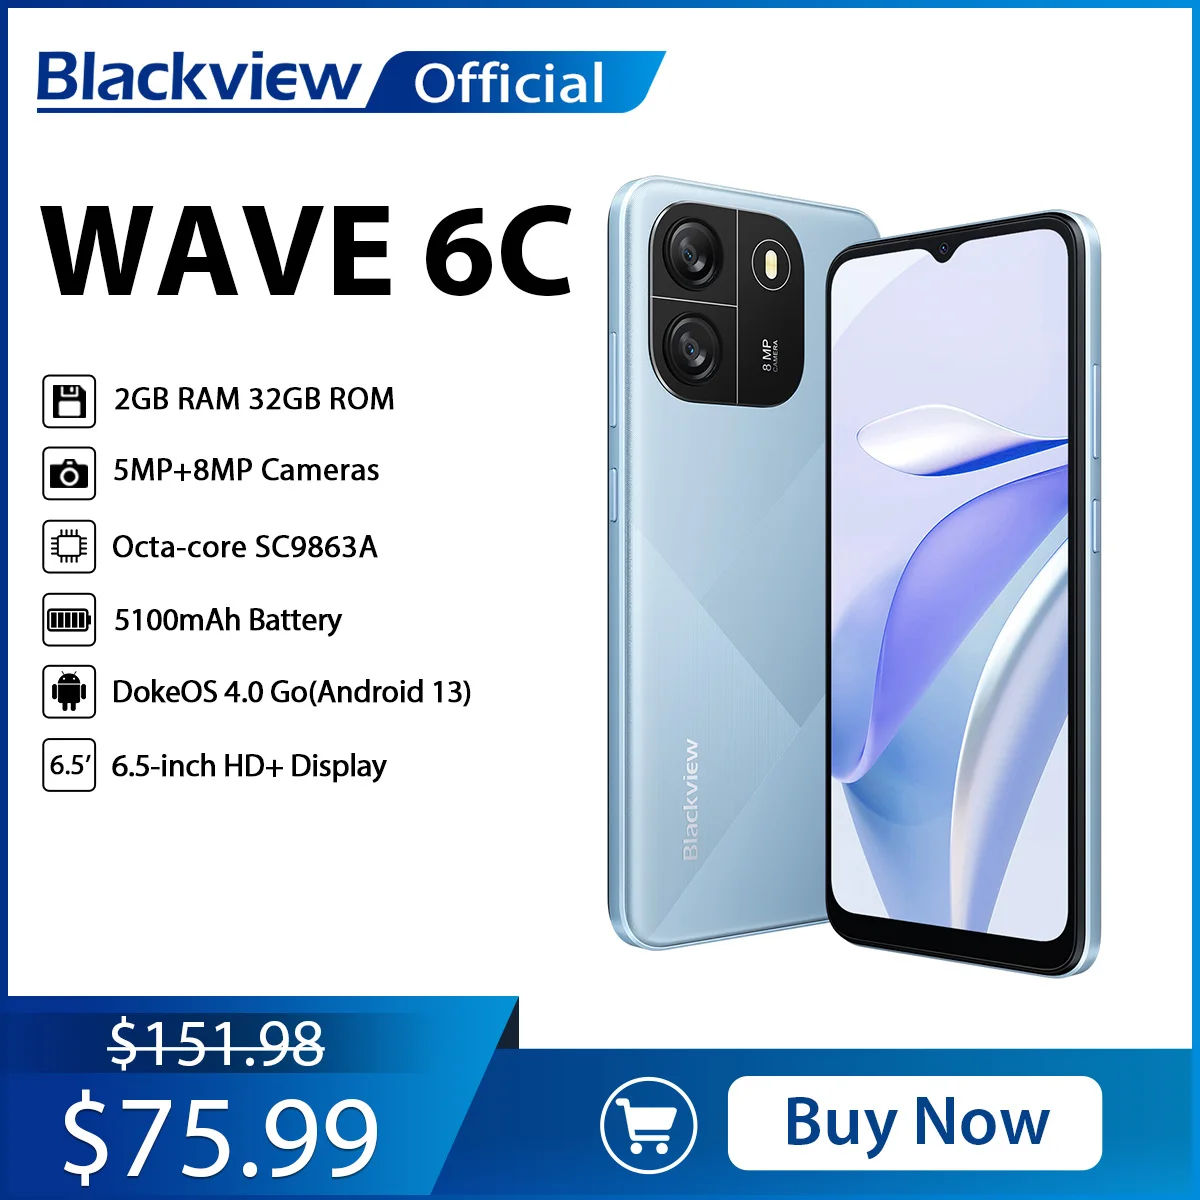 

Blackview Wave 6C Smartphone 6.5'' HD Display Octa Core 5100mAh Battery Cell Phone 2GB 32GB 8MP Camera Mobile Phone Android13